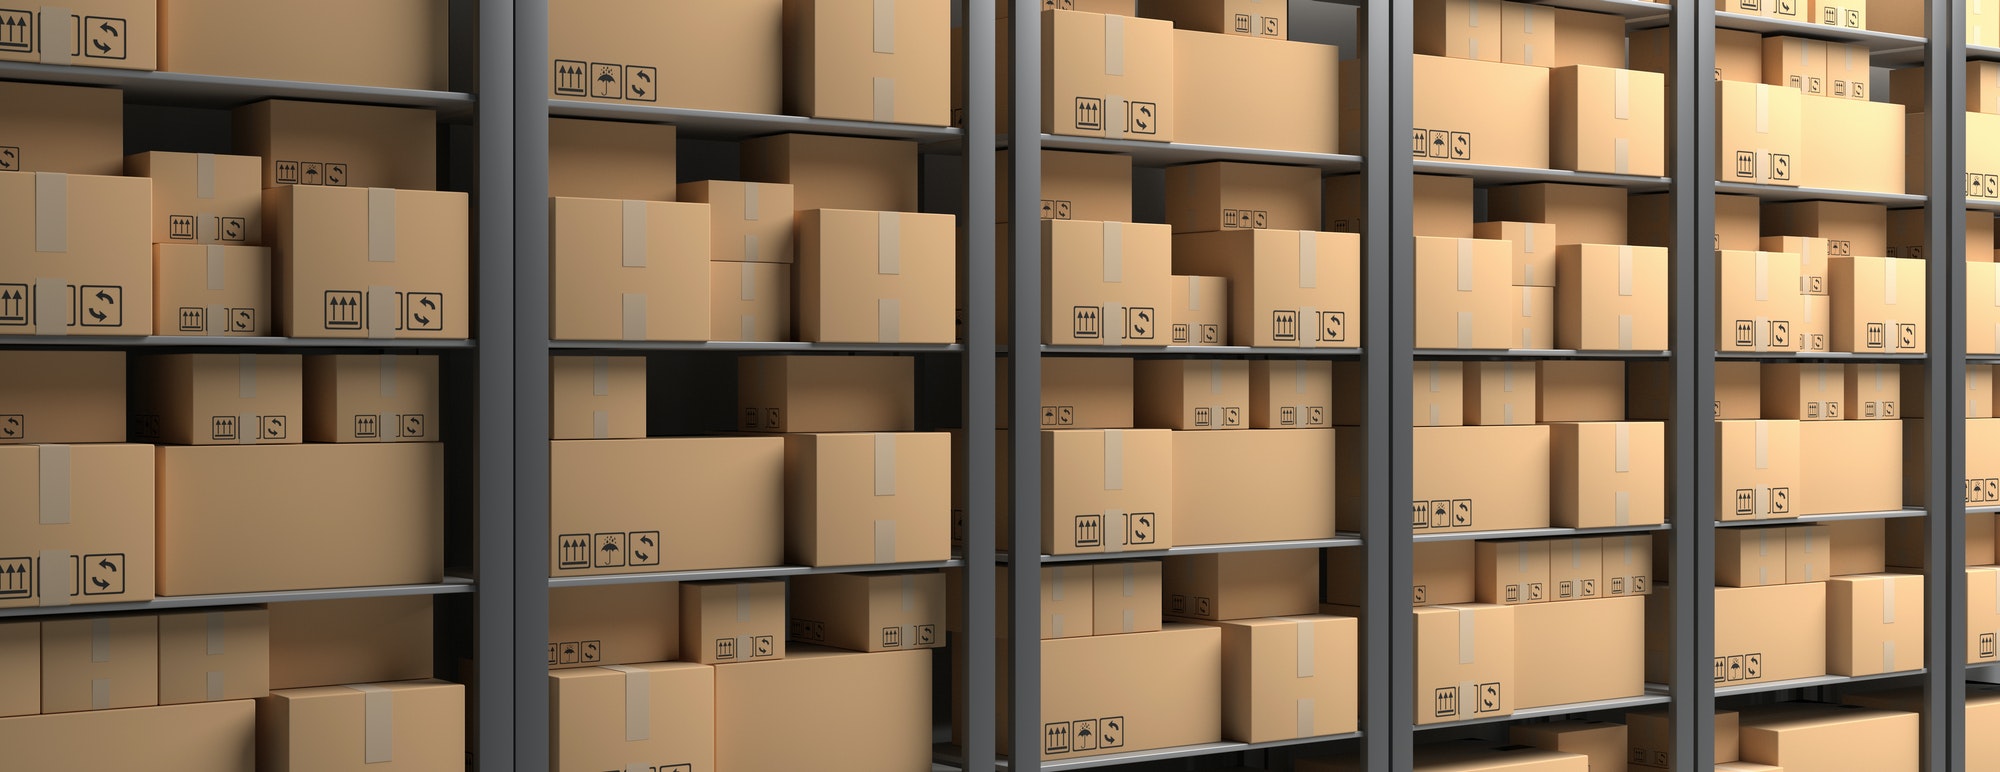 cardboard boxes on storage warehouse shelves background 3d illustration - Accueil